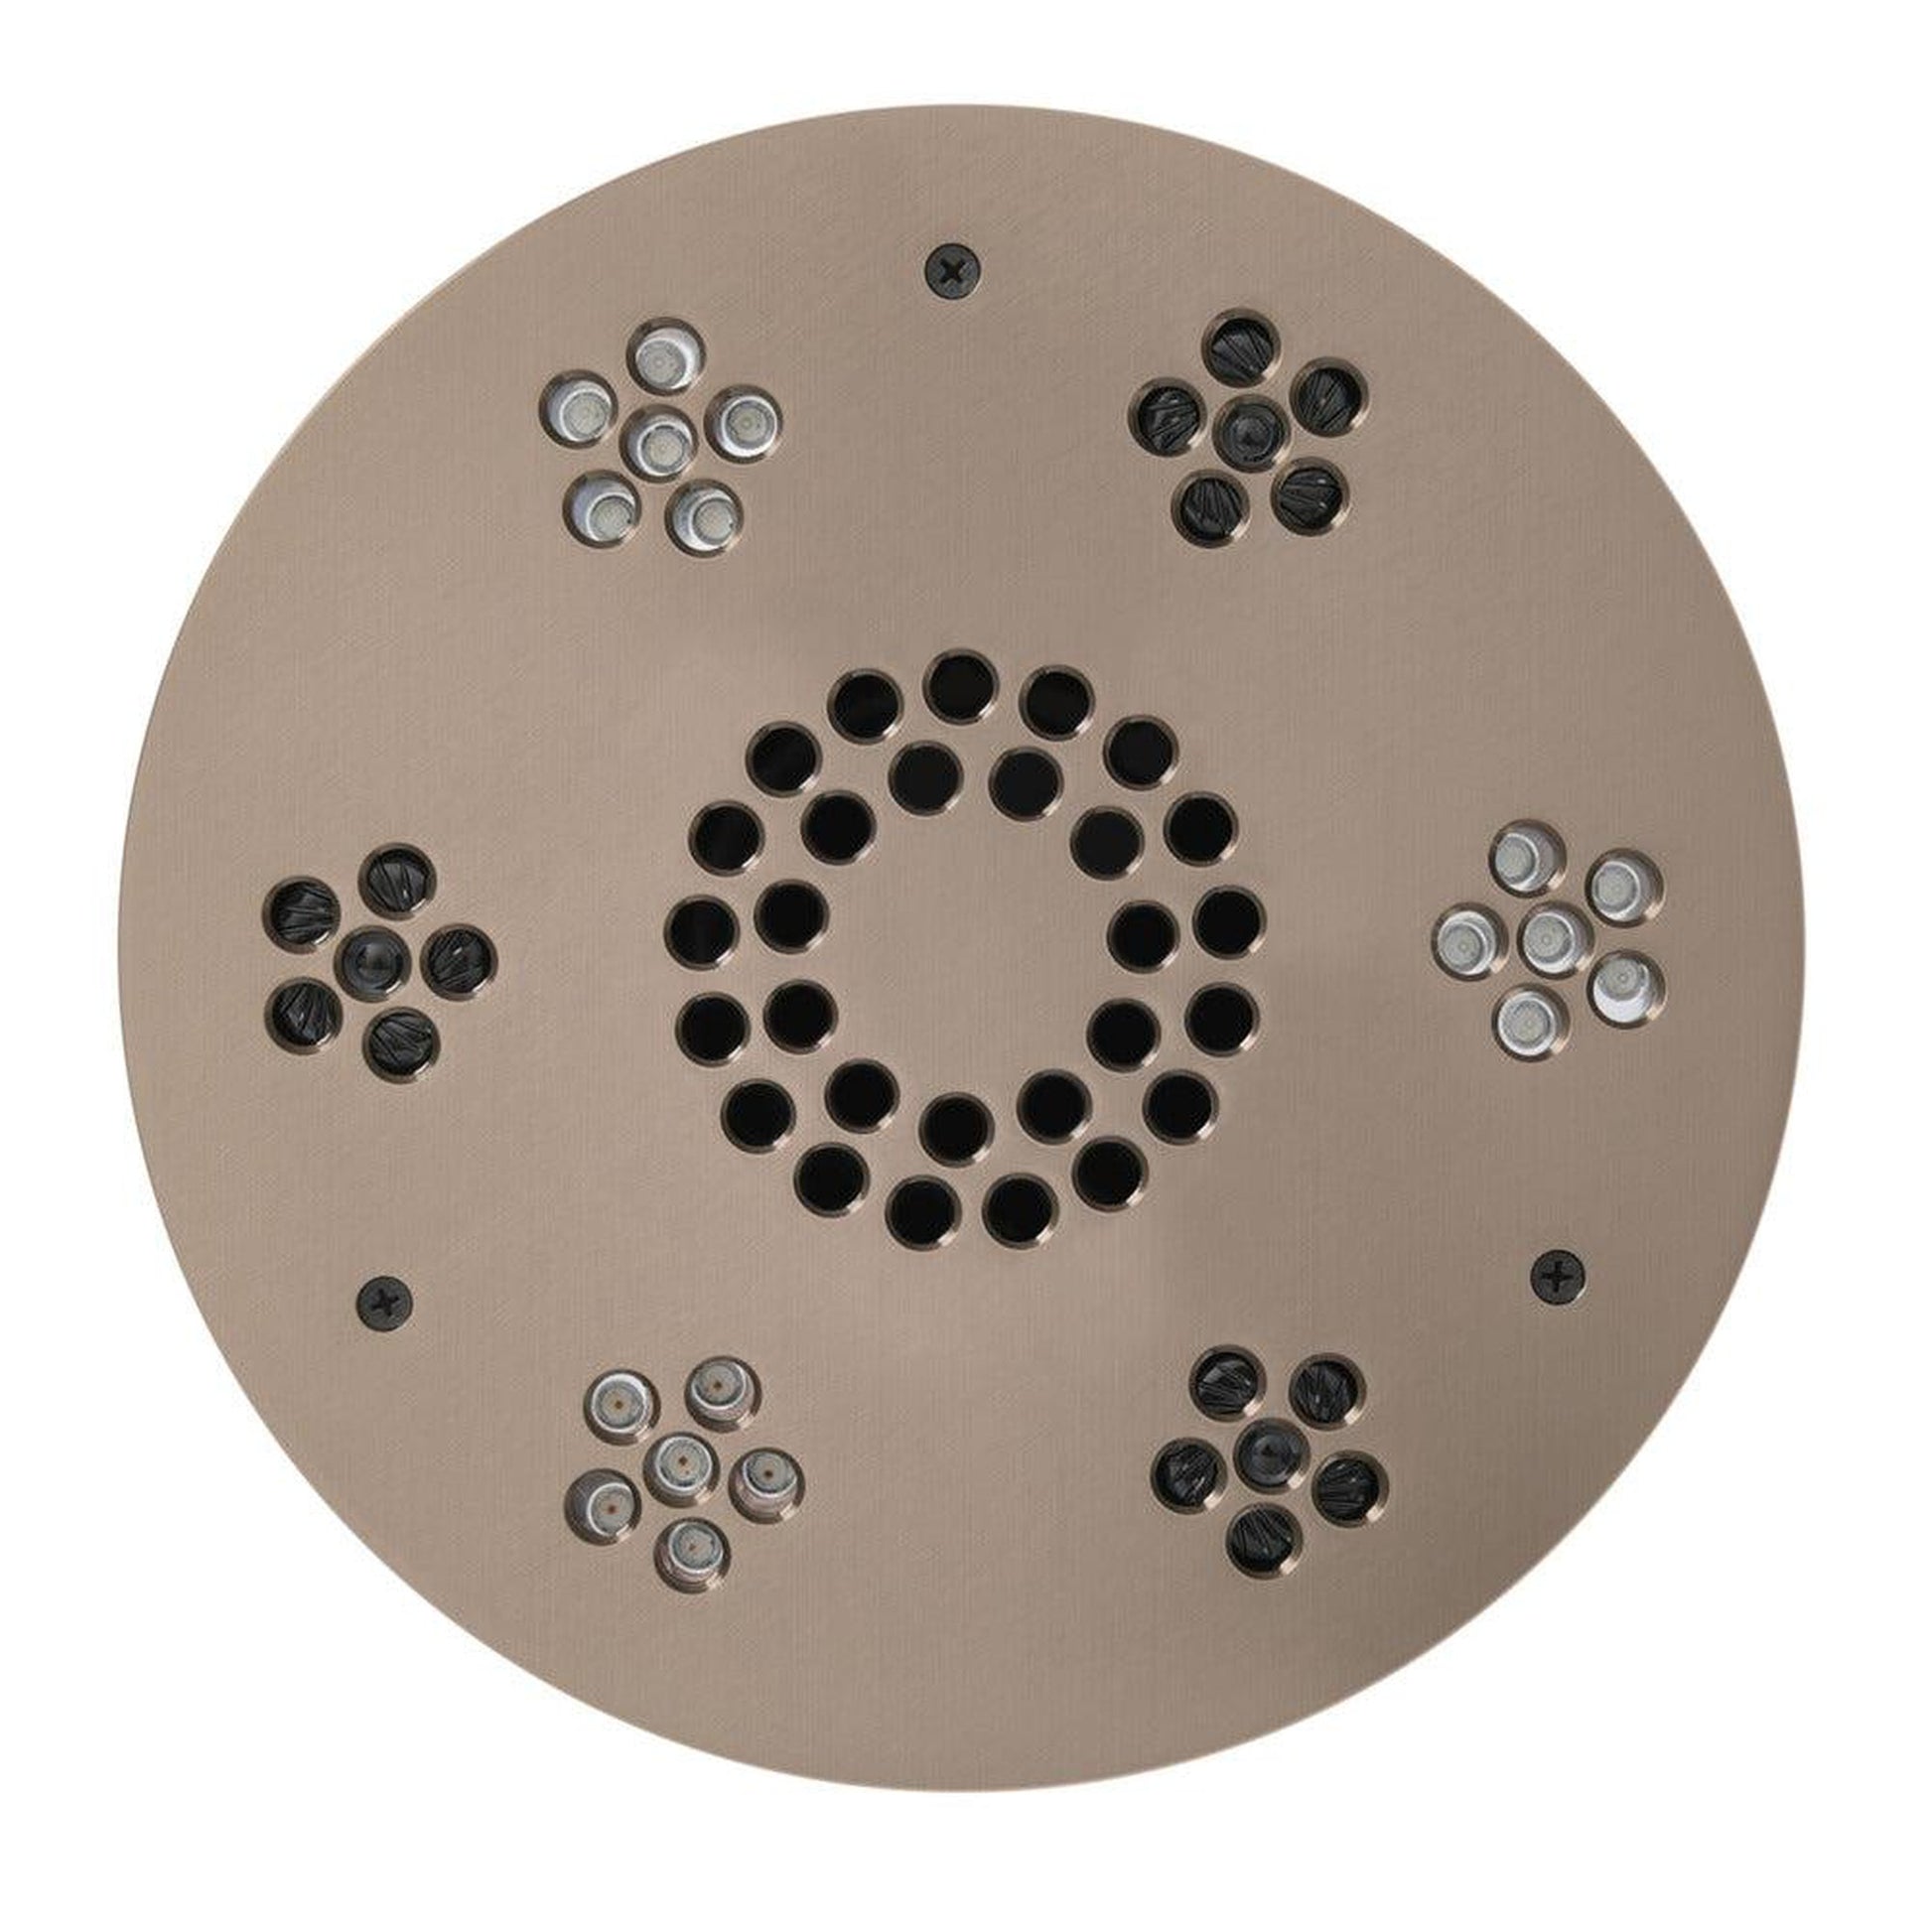 ThermaSol 10" Satin Nickel Finish Round Serenity Essential Light and Music System Modern